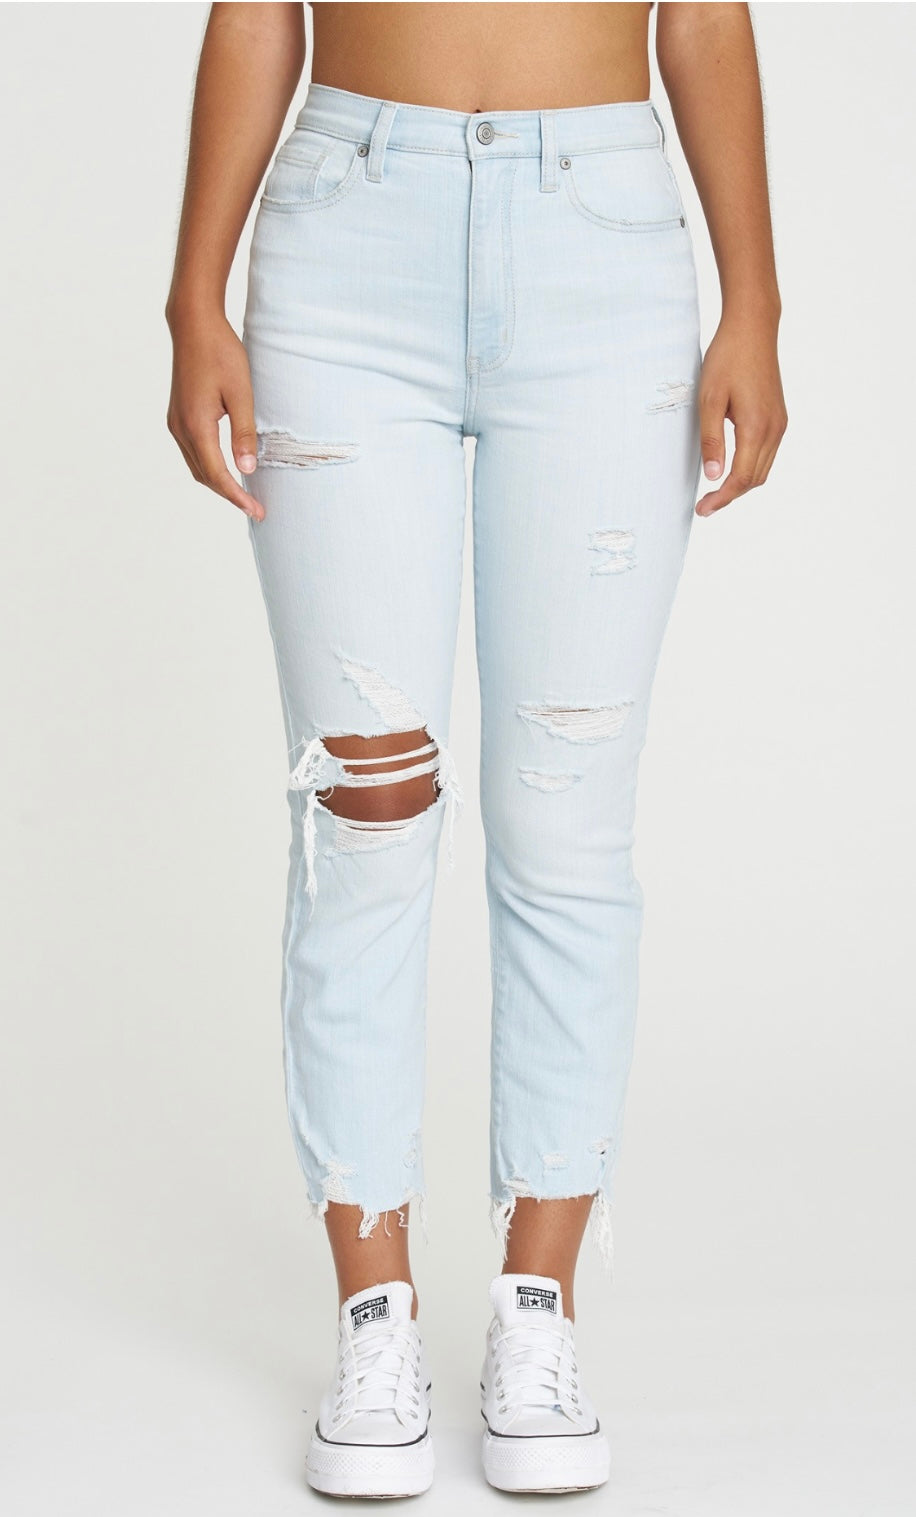 chase grace jeans